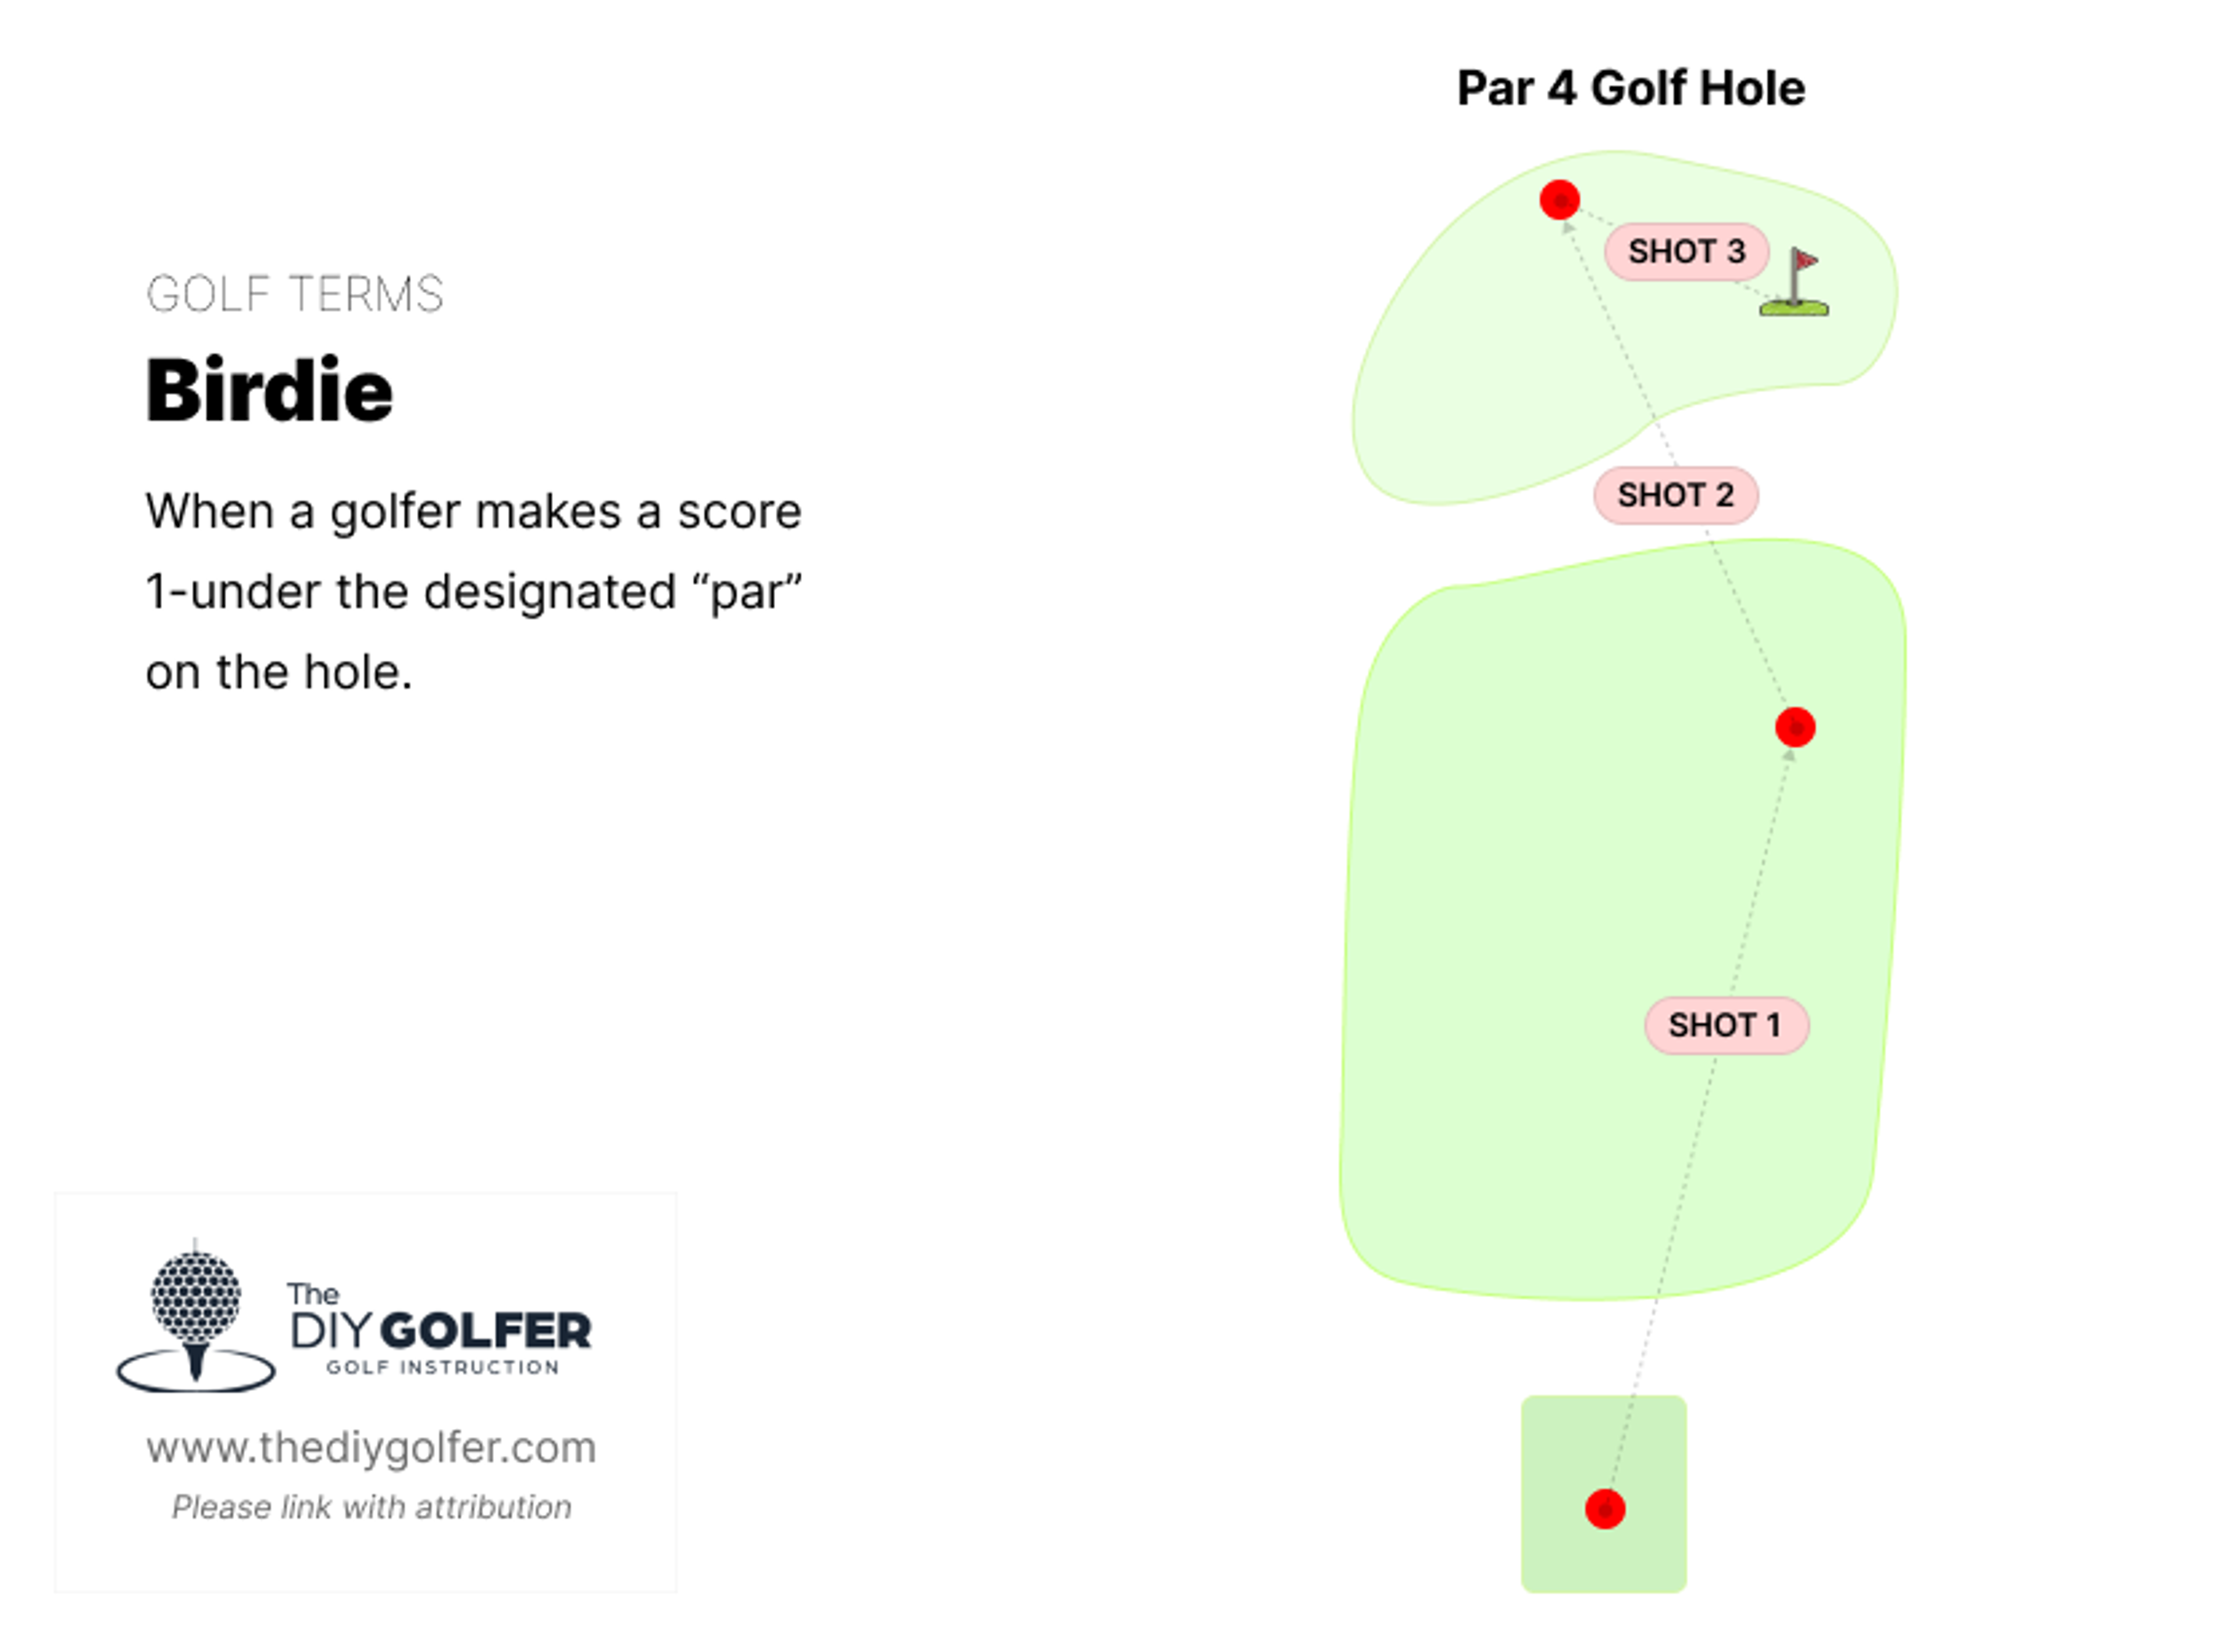 Golf Terms Infographic: What is a Birdie?